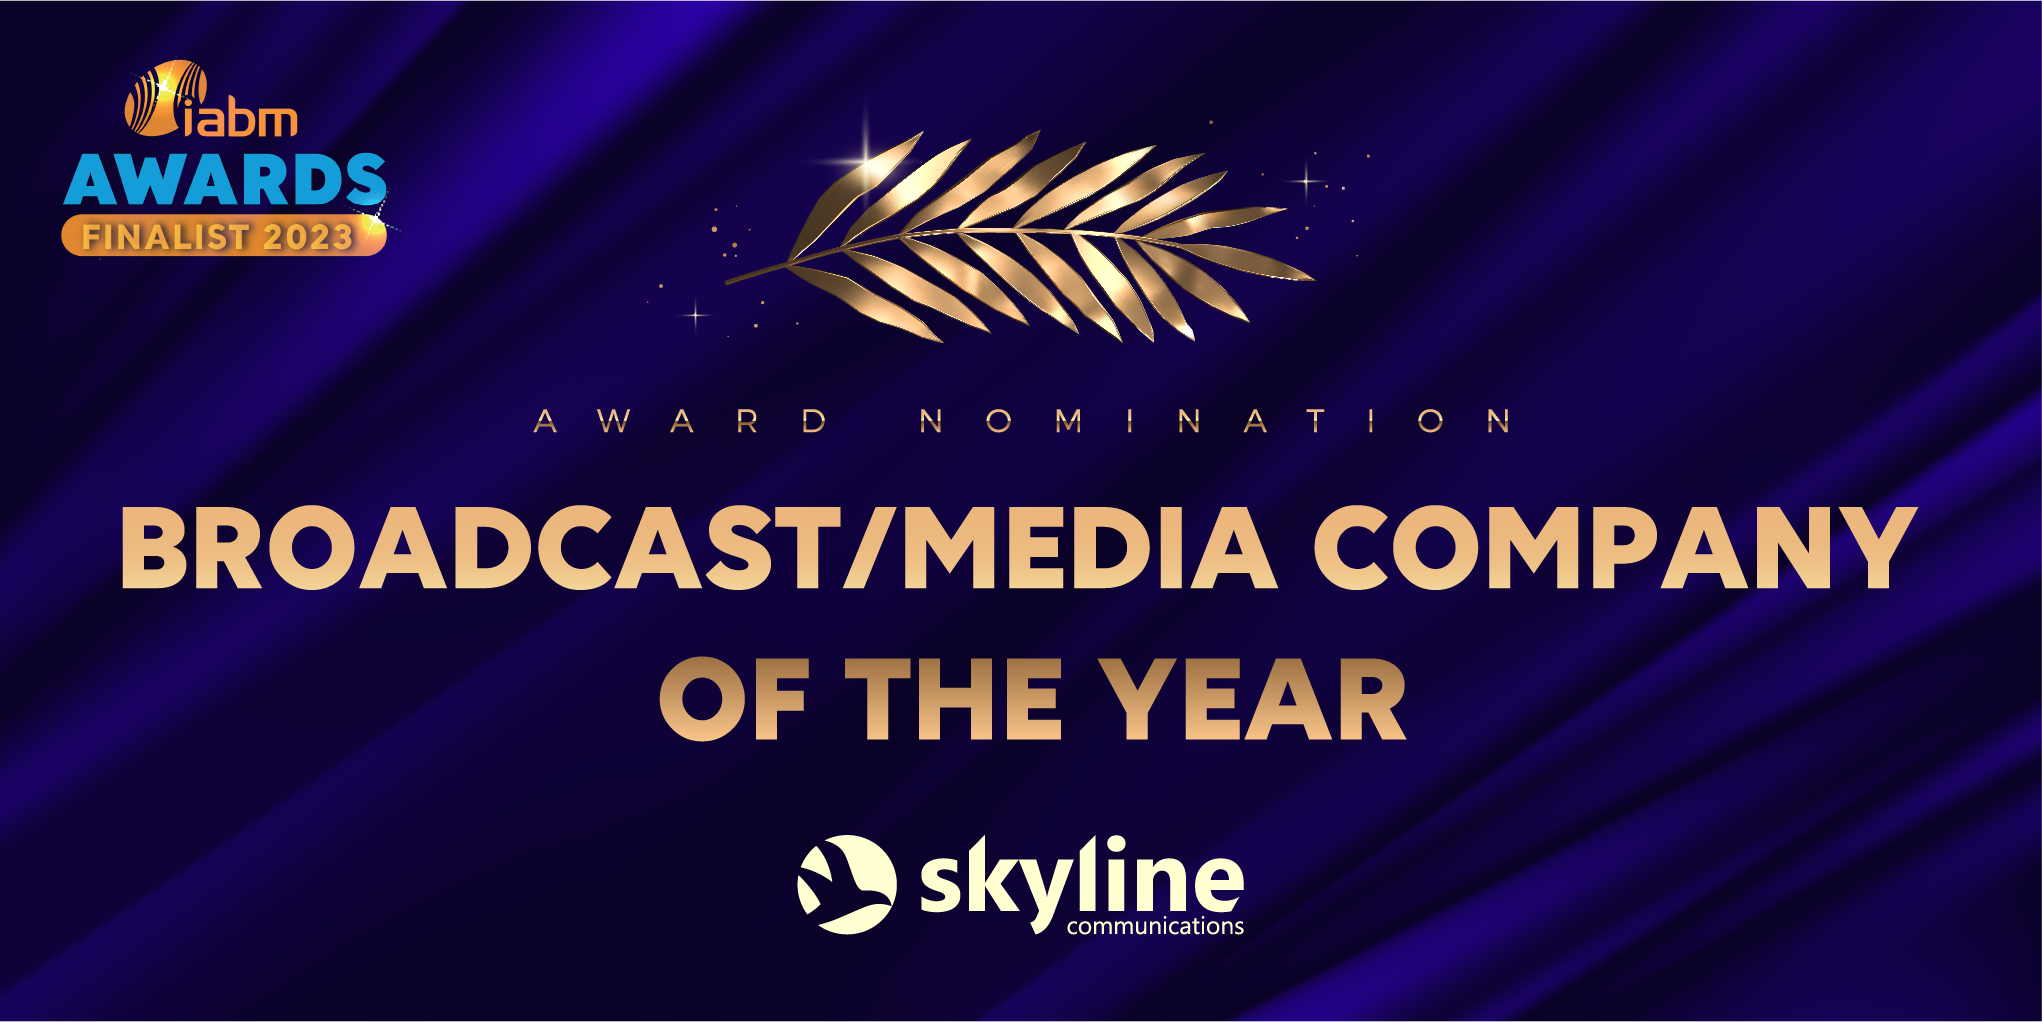 Skyline Communications shortlisted for “Media Company of the Year” by IABM